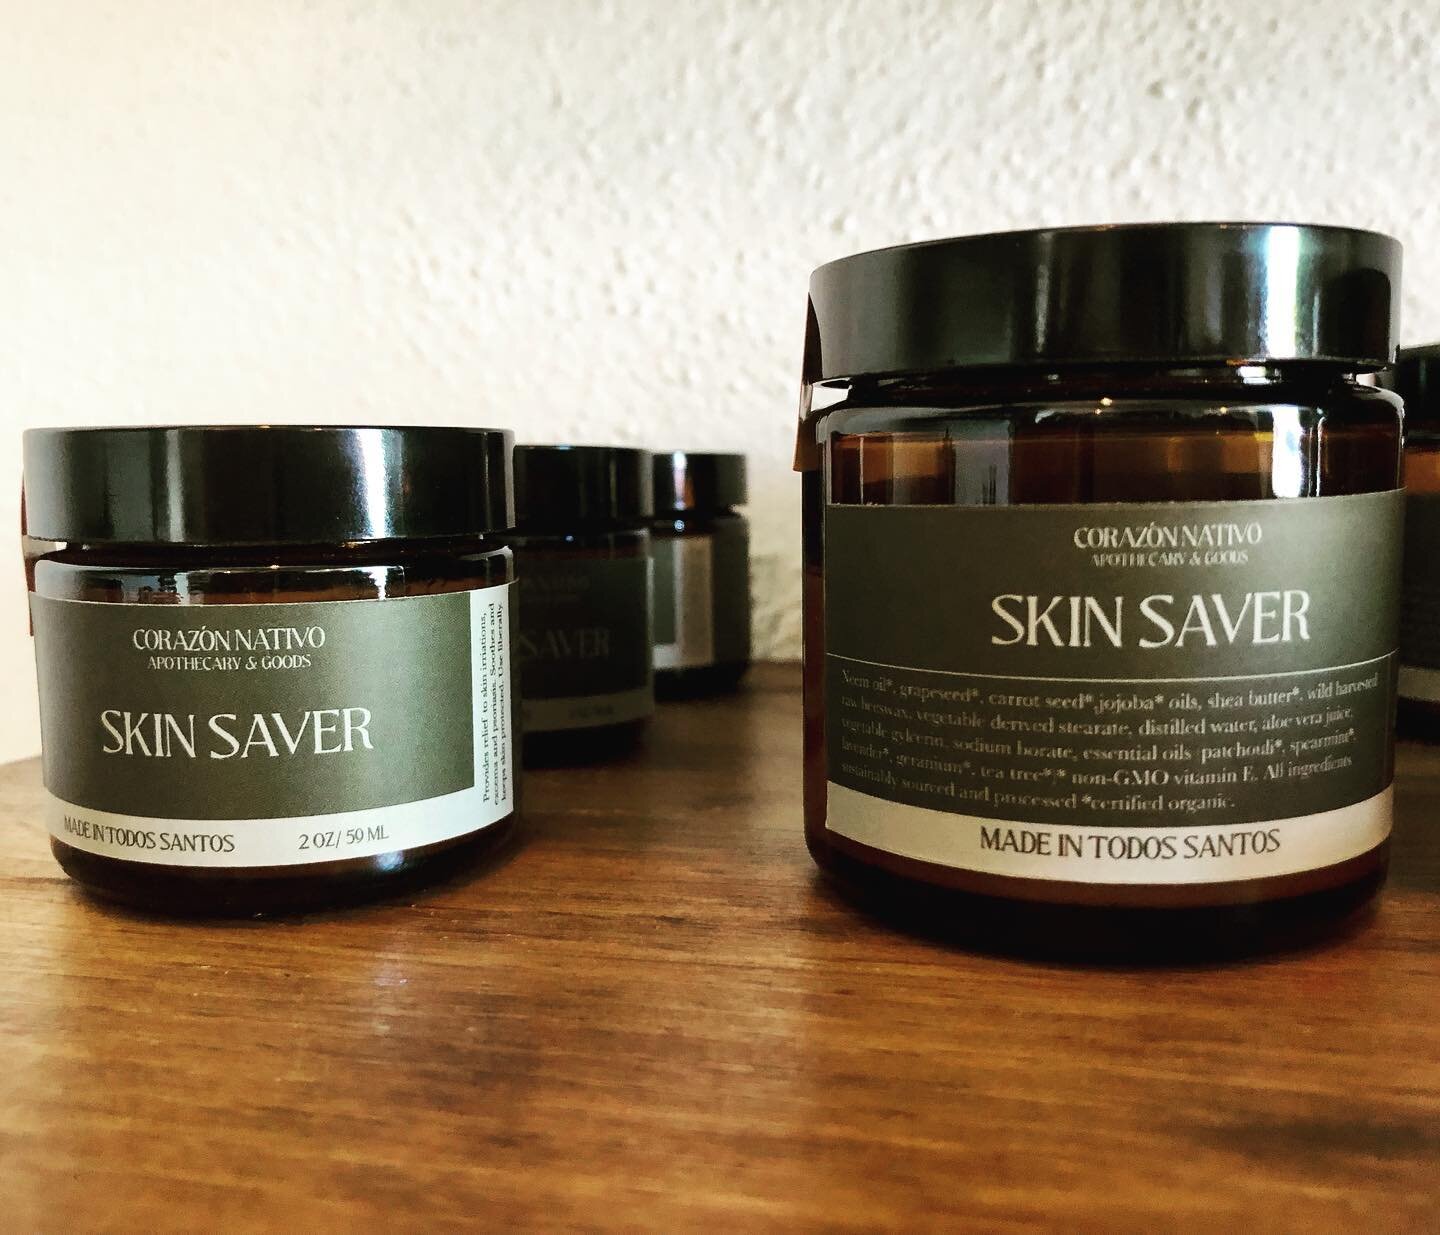 **more new products** you asked for it so we brought it back! Reformulated to be organic, our famous neem cream is back as Skin Saver! Great for eczema, psoriasis, or any skin irritation. We have customers who swear by this and have been using it for